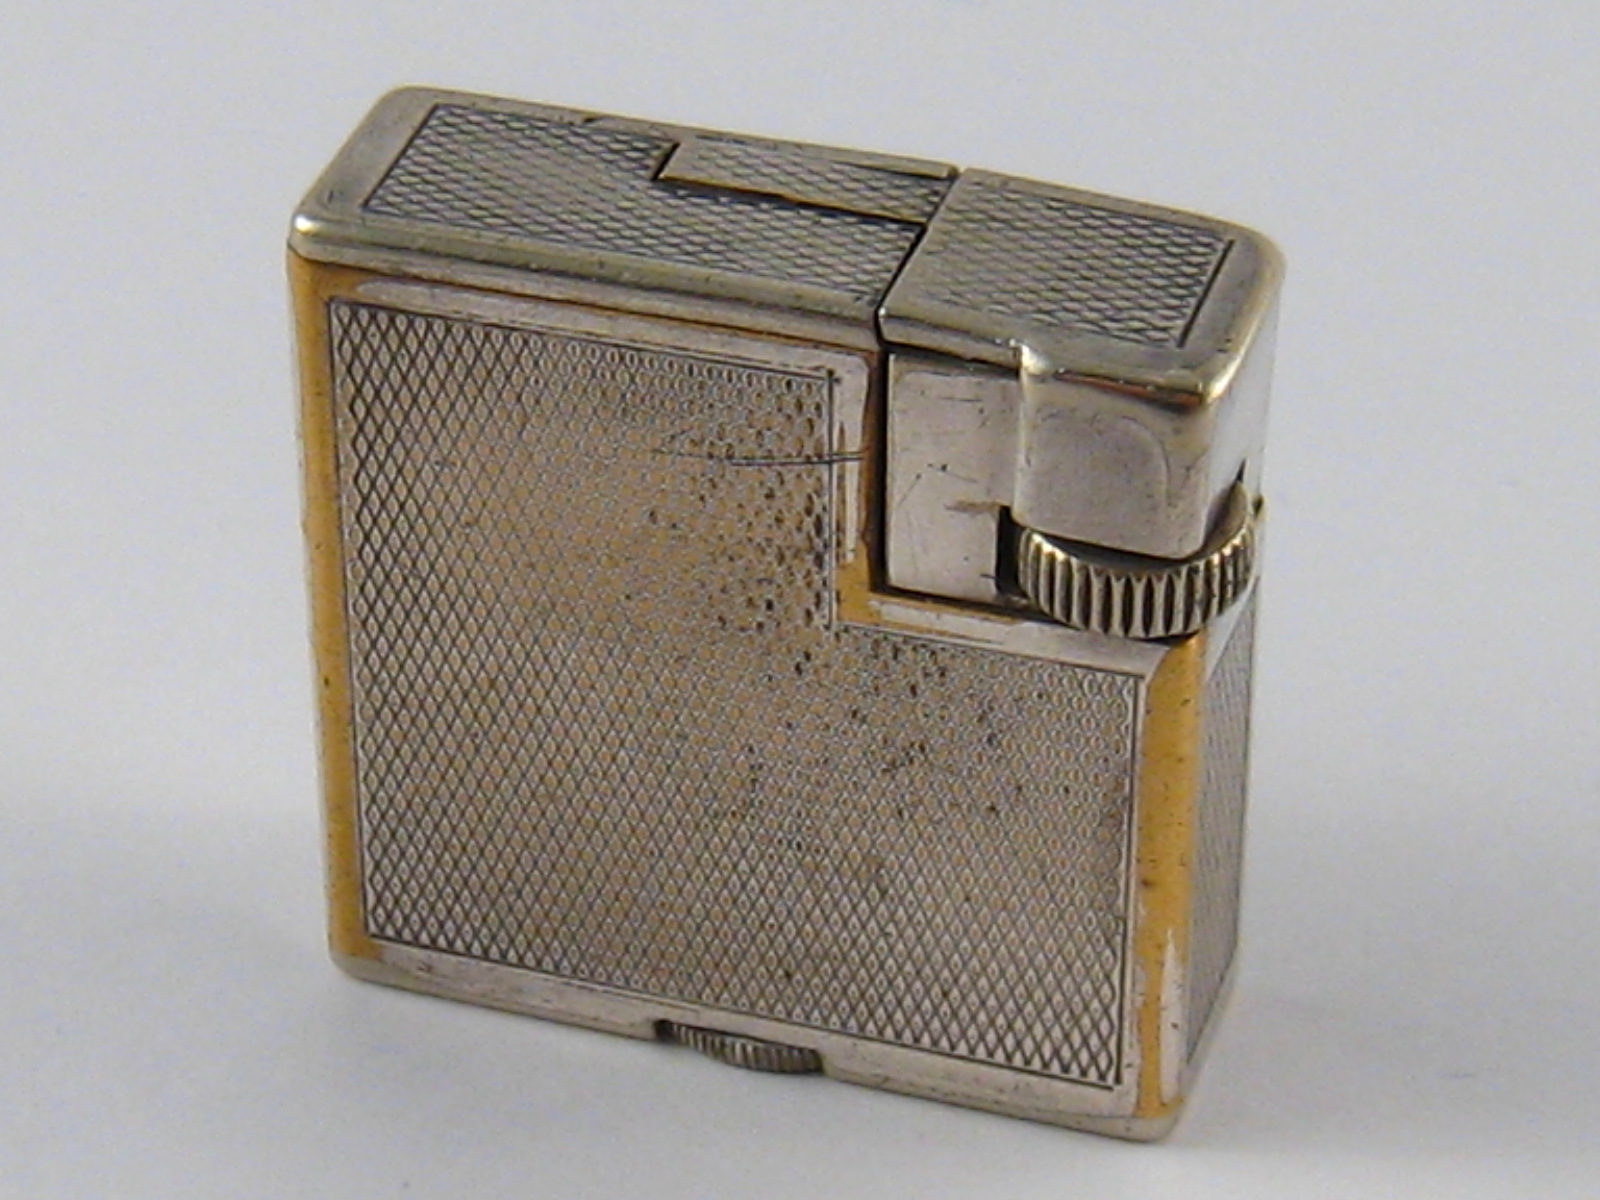 A silver plate Dunhill London cigarette lighter, made in Switzerland, approx 3.5 x 3.5cm.